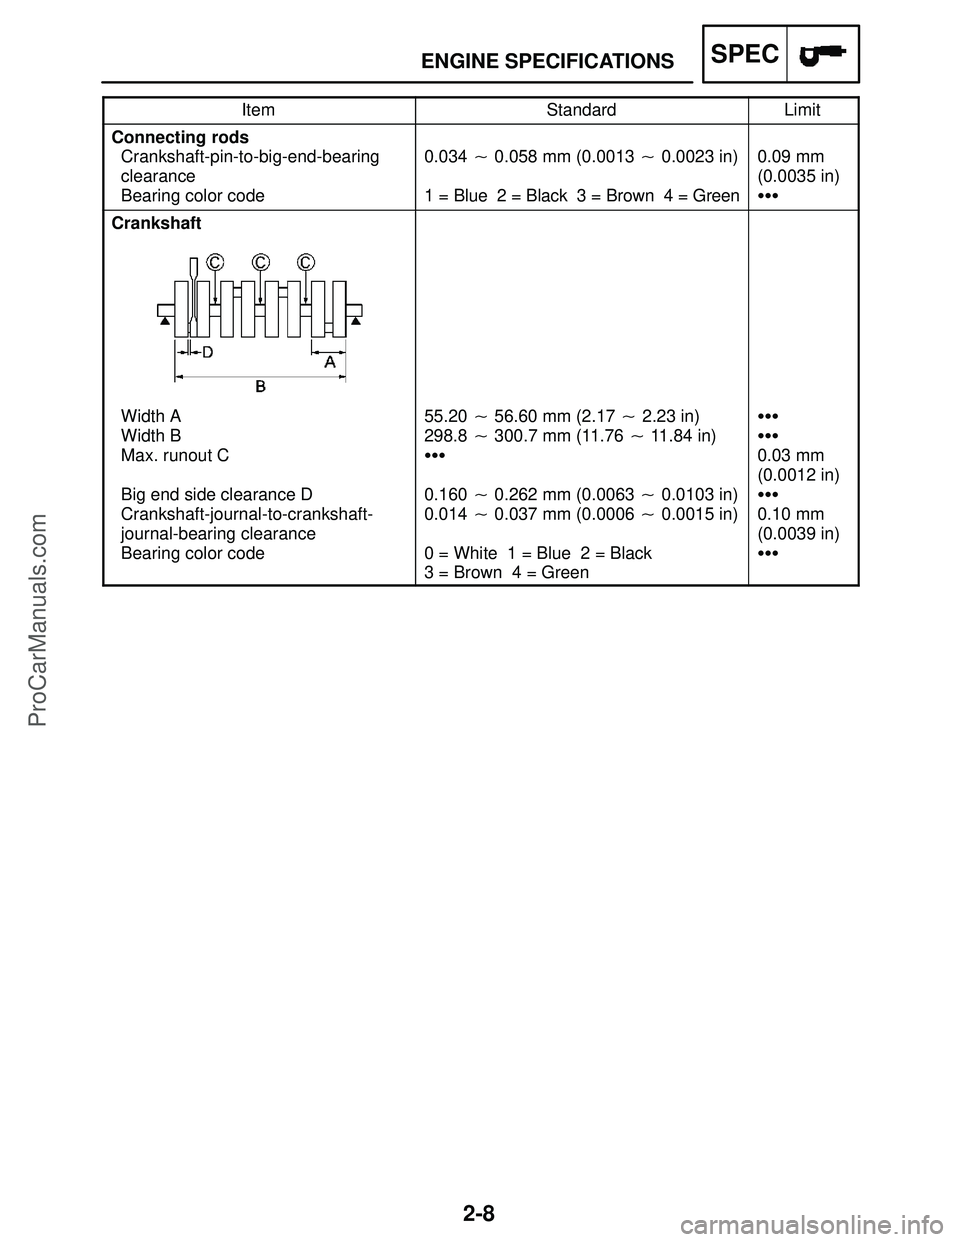 YAMAHA YZF-R1S 2004  Service Manual 2-8
ENGINE SPECIFICATIONSSPEC
ItemStandardLimit
Connecting rods
Crankshaft-pin-to-big-end-bearing
clearance
Bearing color code
0.034  0.058 mm (0.0013  0.0023 in)
1 = Blue 2 = Black 3 = Brown 4 = Gr